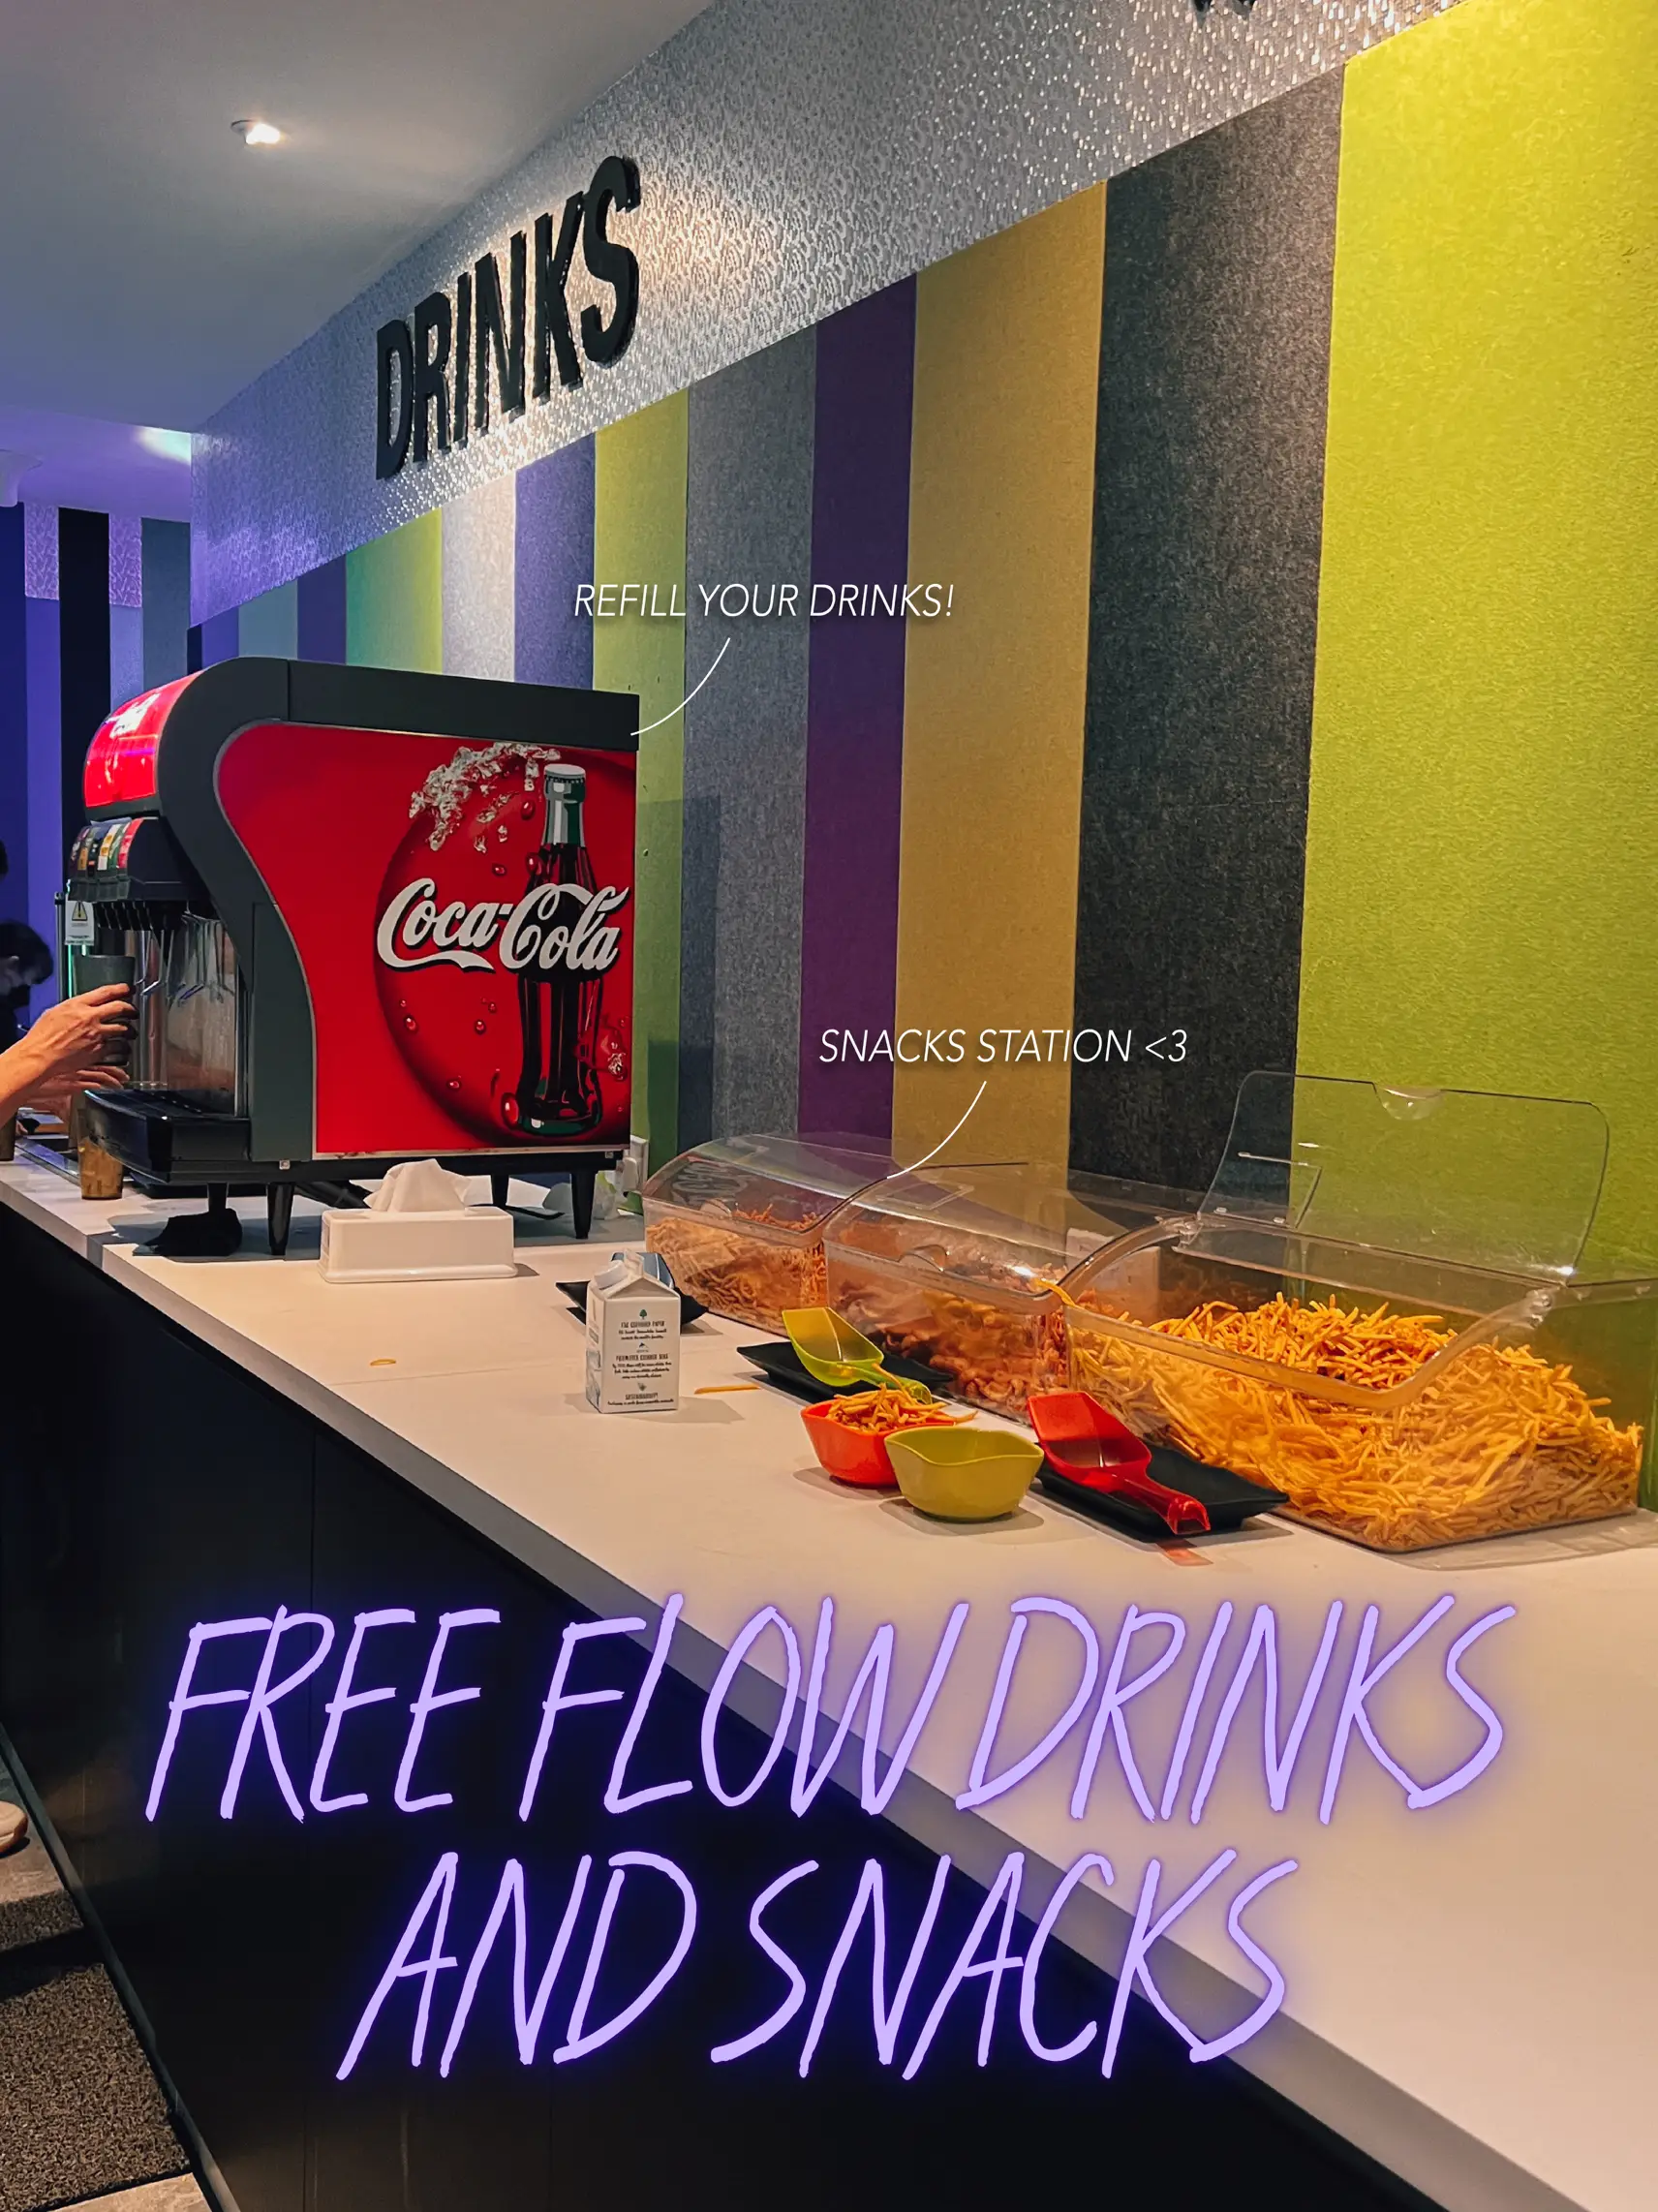 ktv from $4/hr per pax + free drinks & snacks 🥵🤌🤌 's images(2)